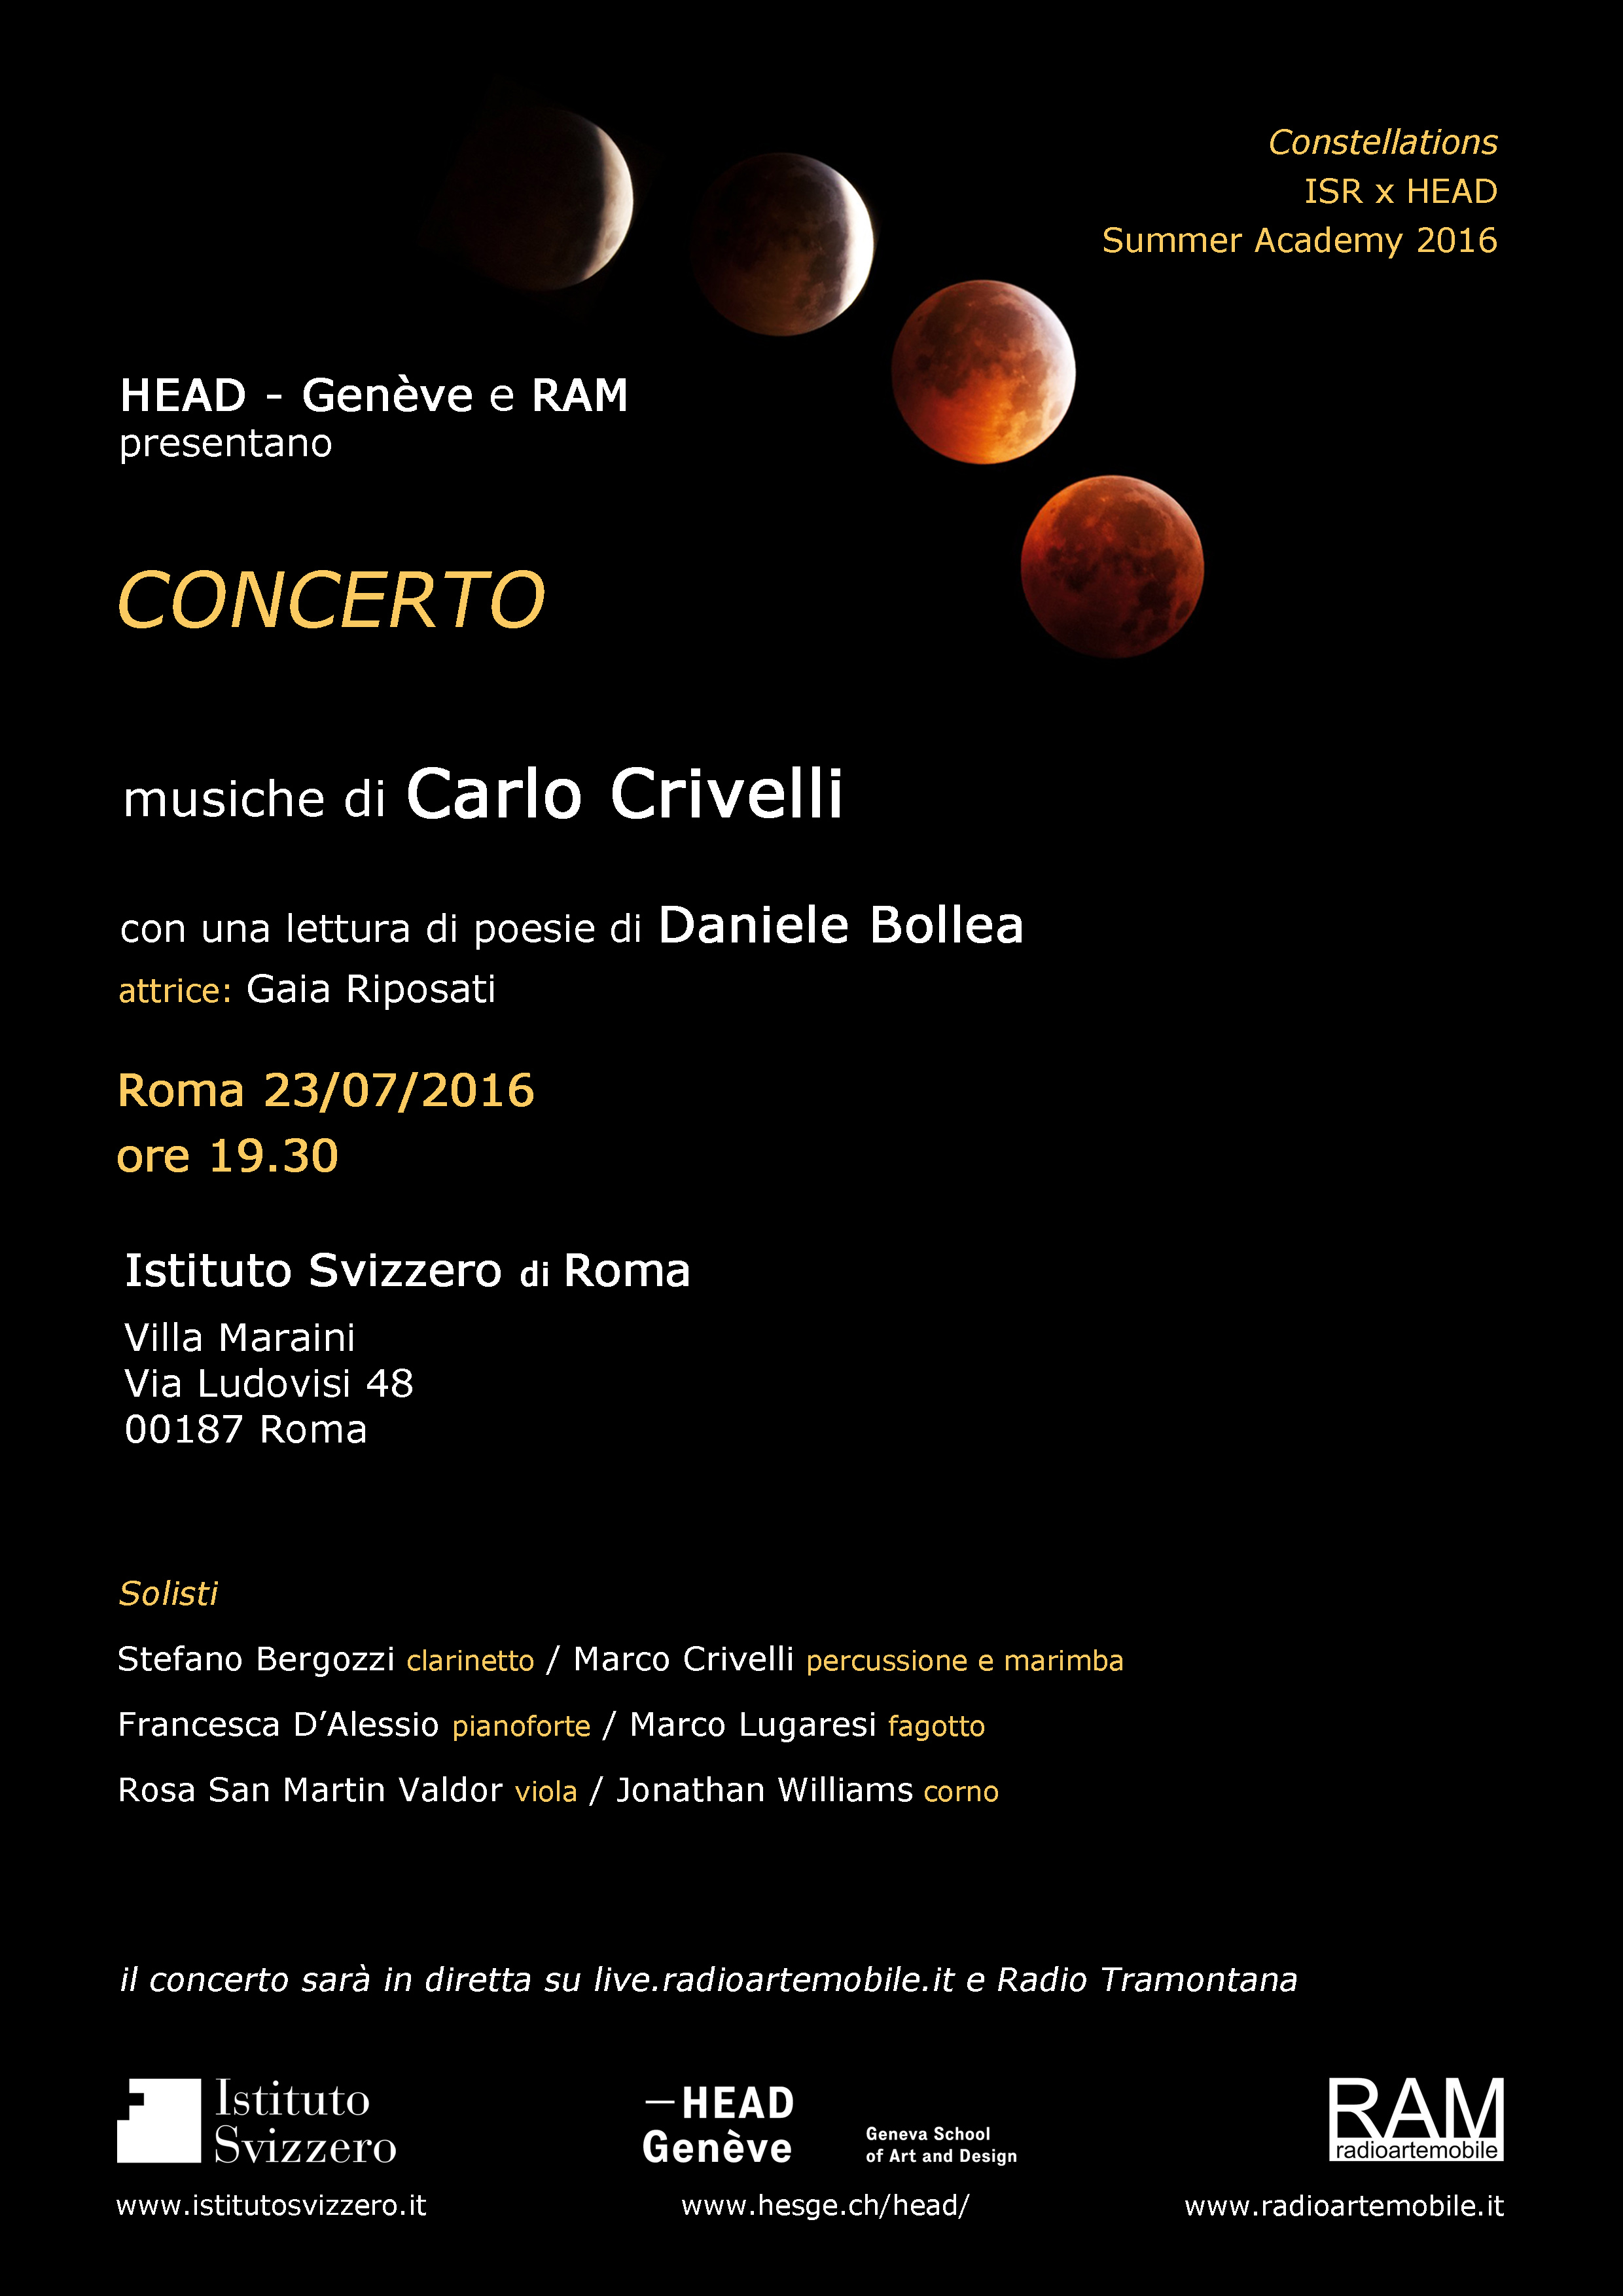 invitation to the concert